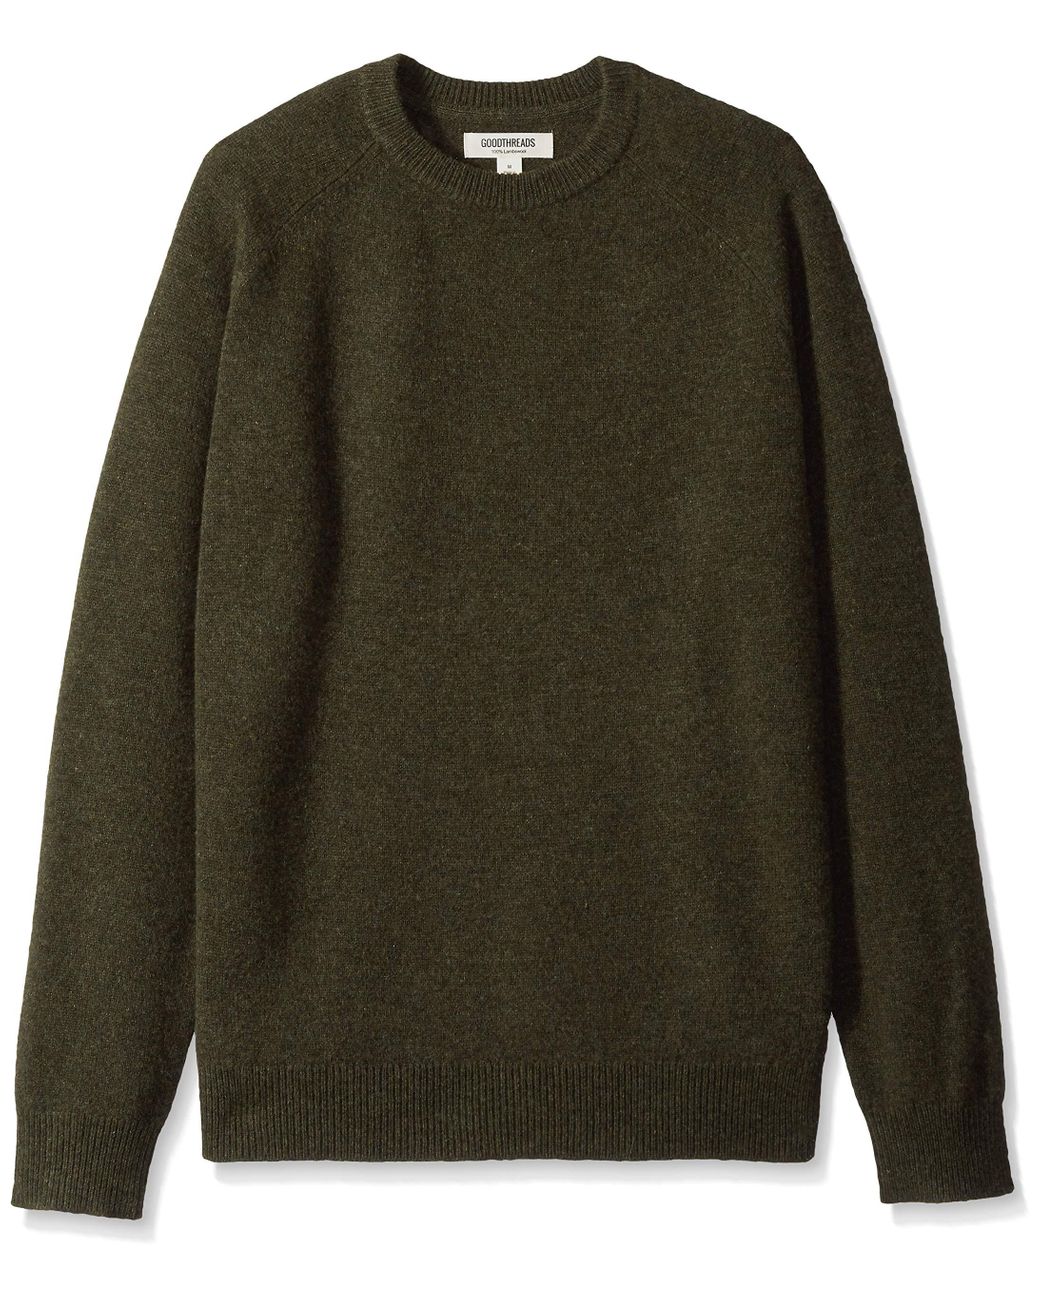 Goodthreads Lambswool Crewneck Sweater in Olive (Green) for Men - Lyst